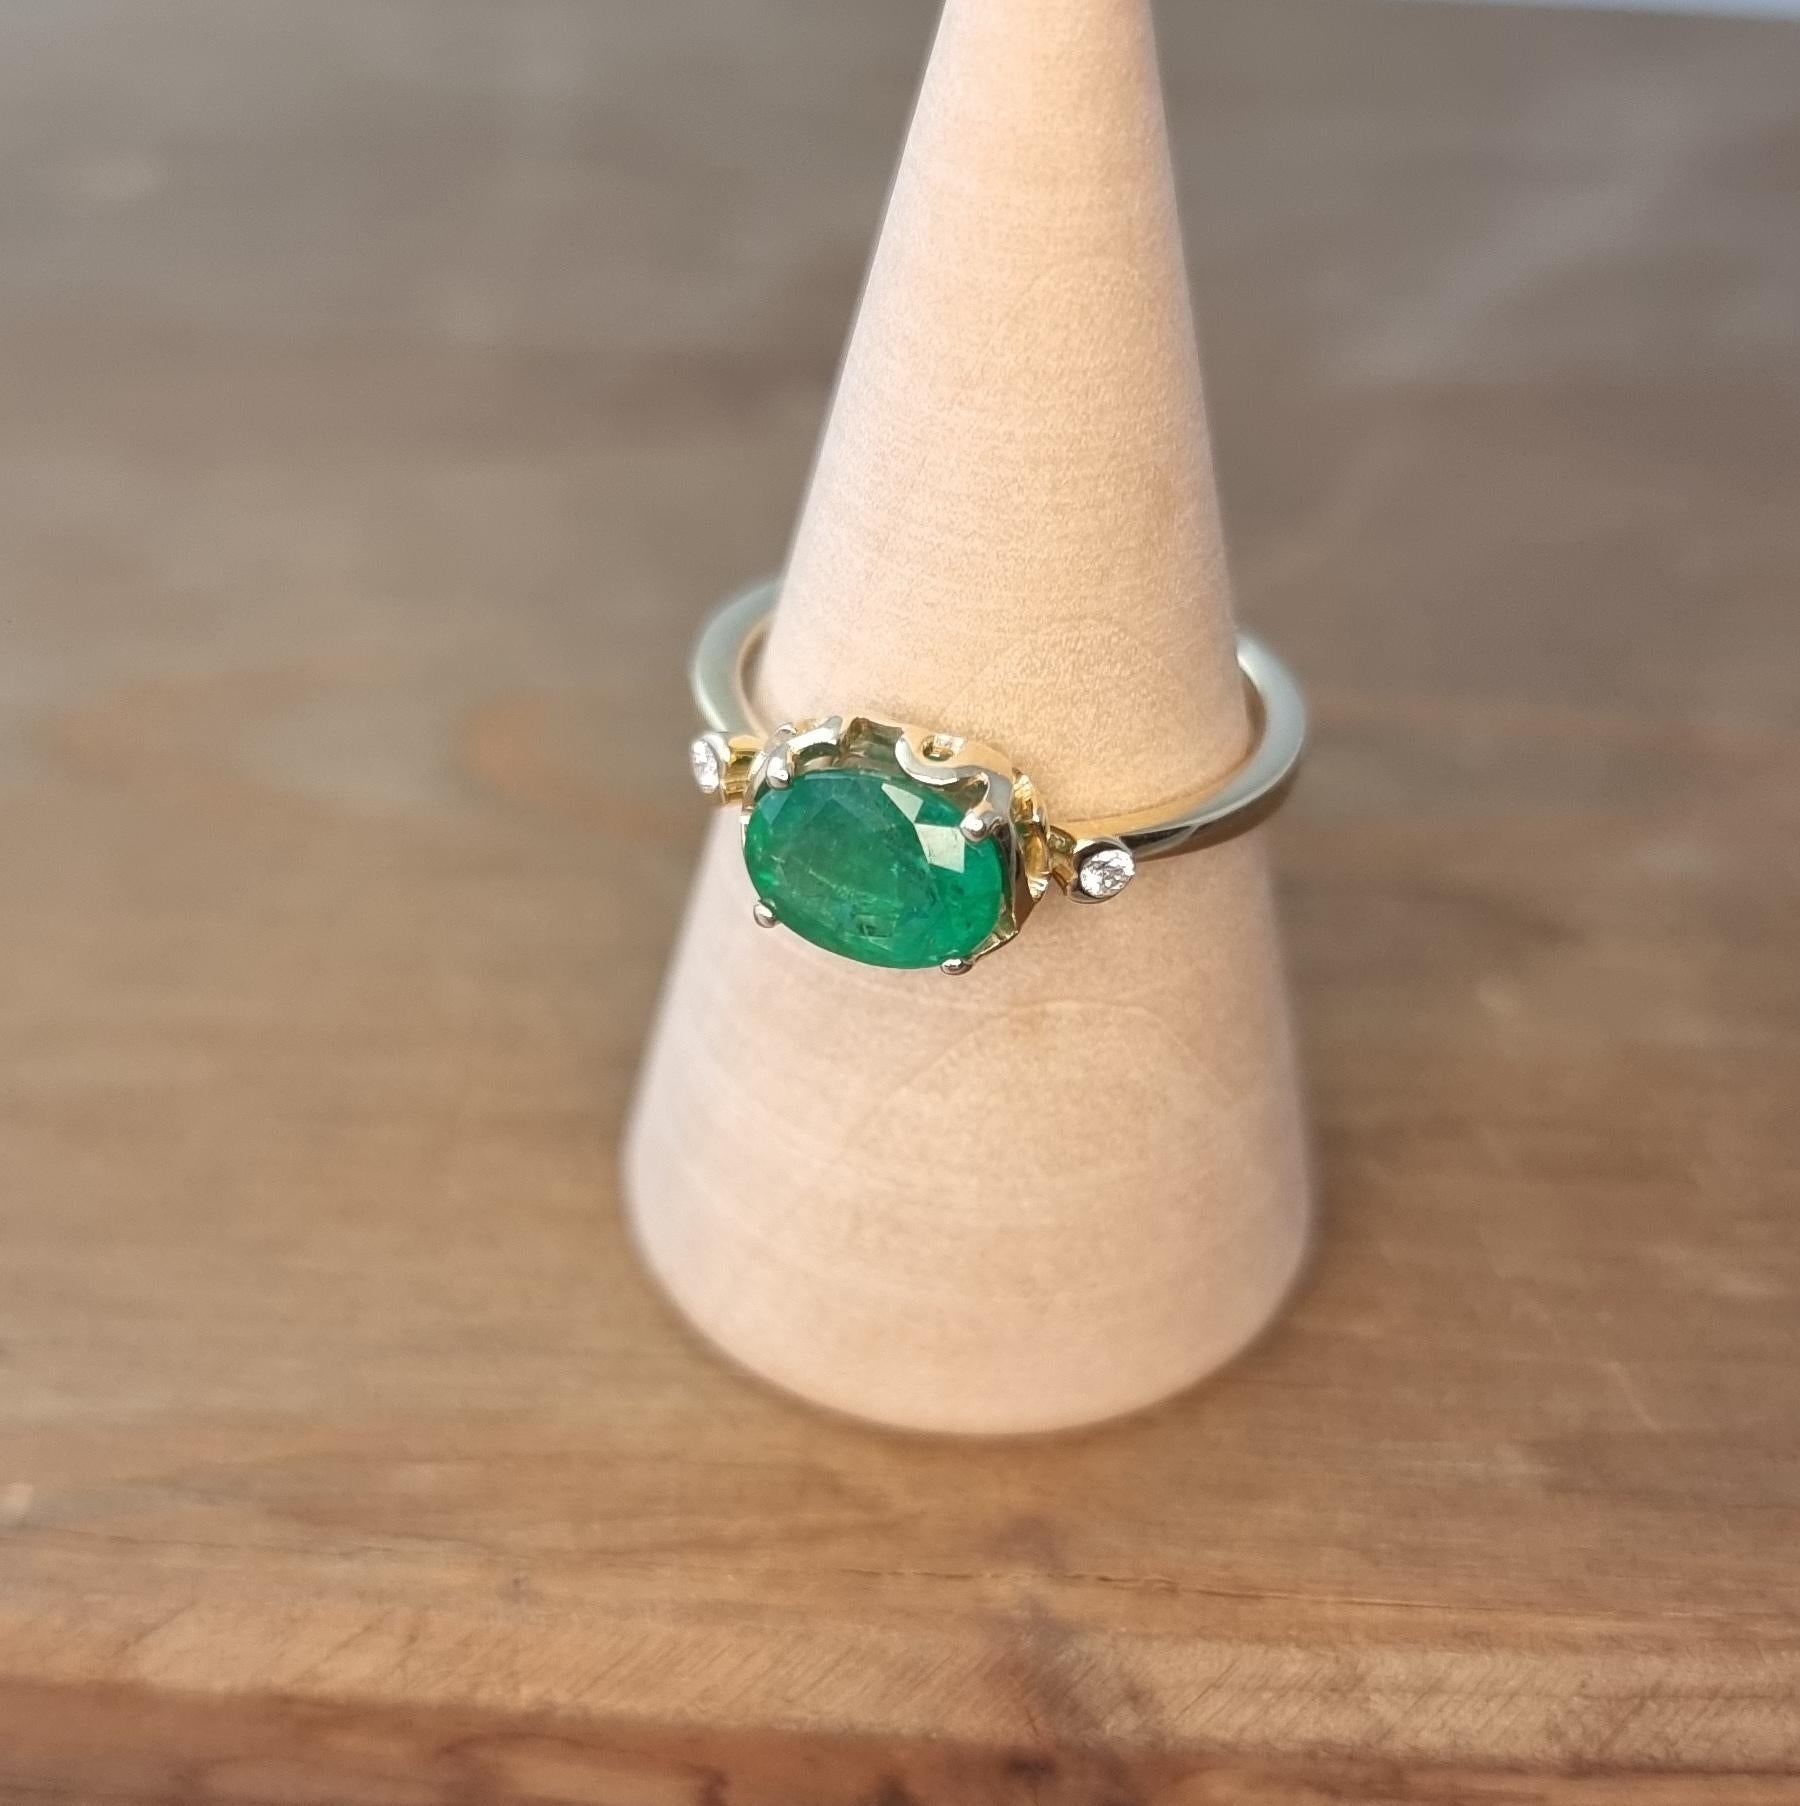 Stunning Oval Emerald Ring with Two White Diamonds on the Side in 14K Gold For Sale 1